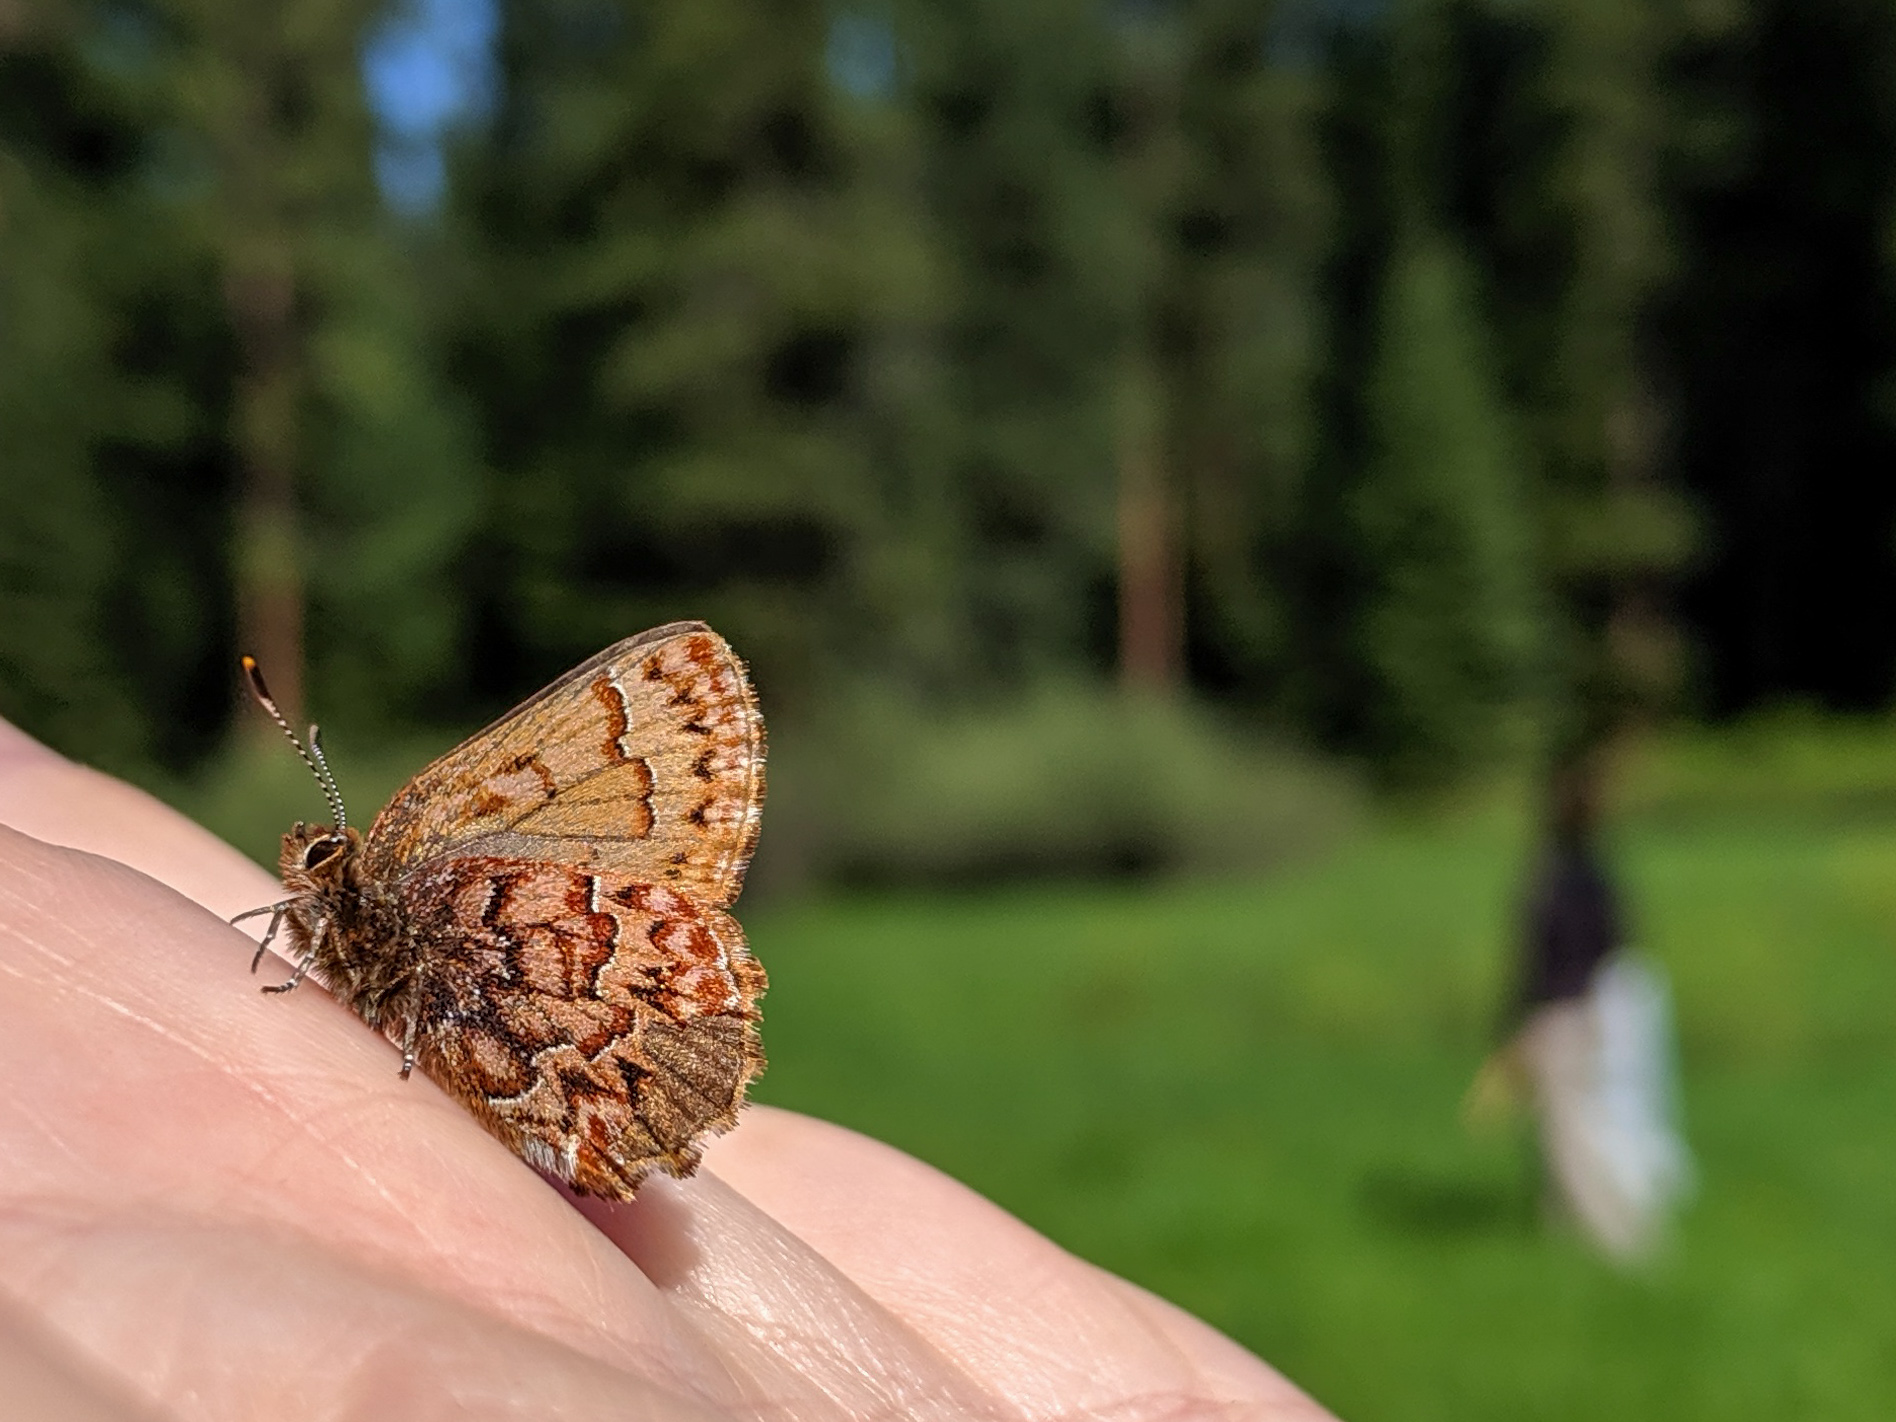 A brown butterfly with zig-zagging lines on its wings and a fuzzy, brown body sits atop a hand. In the background, a blurred figure holding a butterfly net walks through a green meadow.